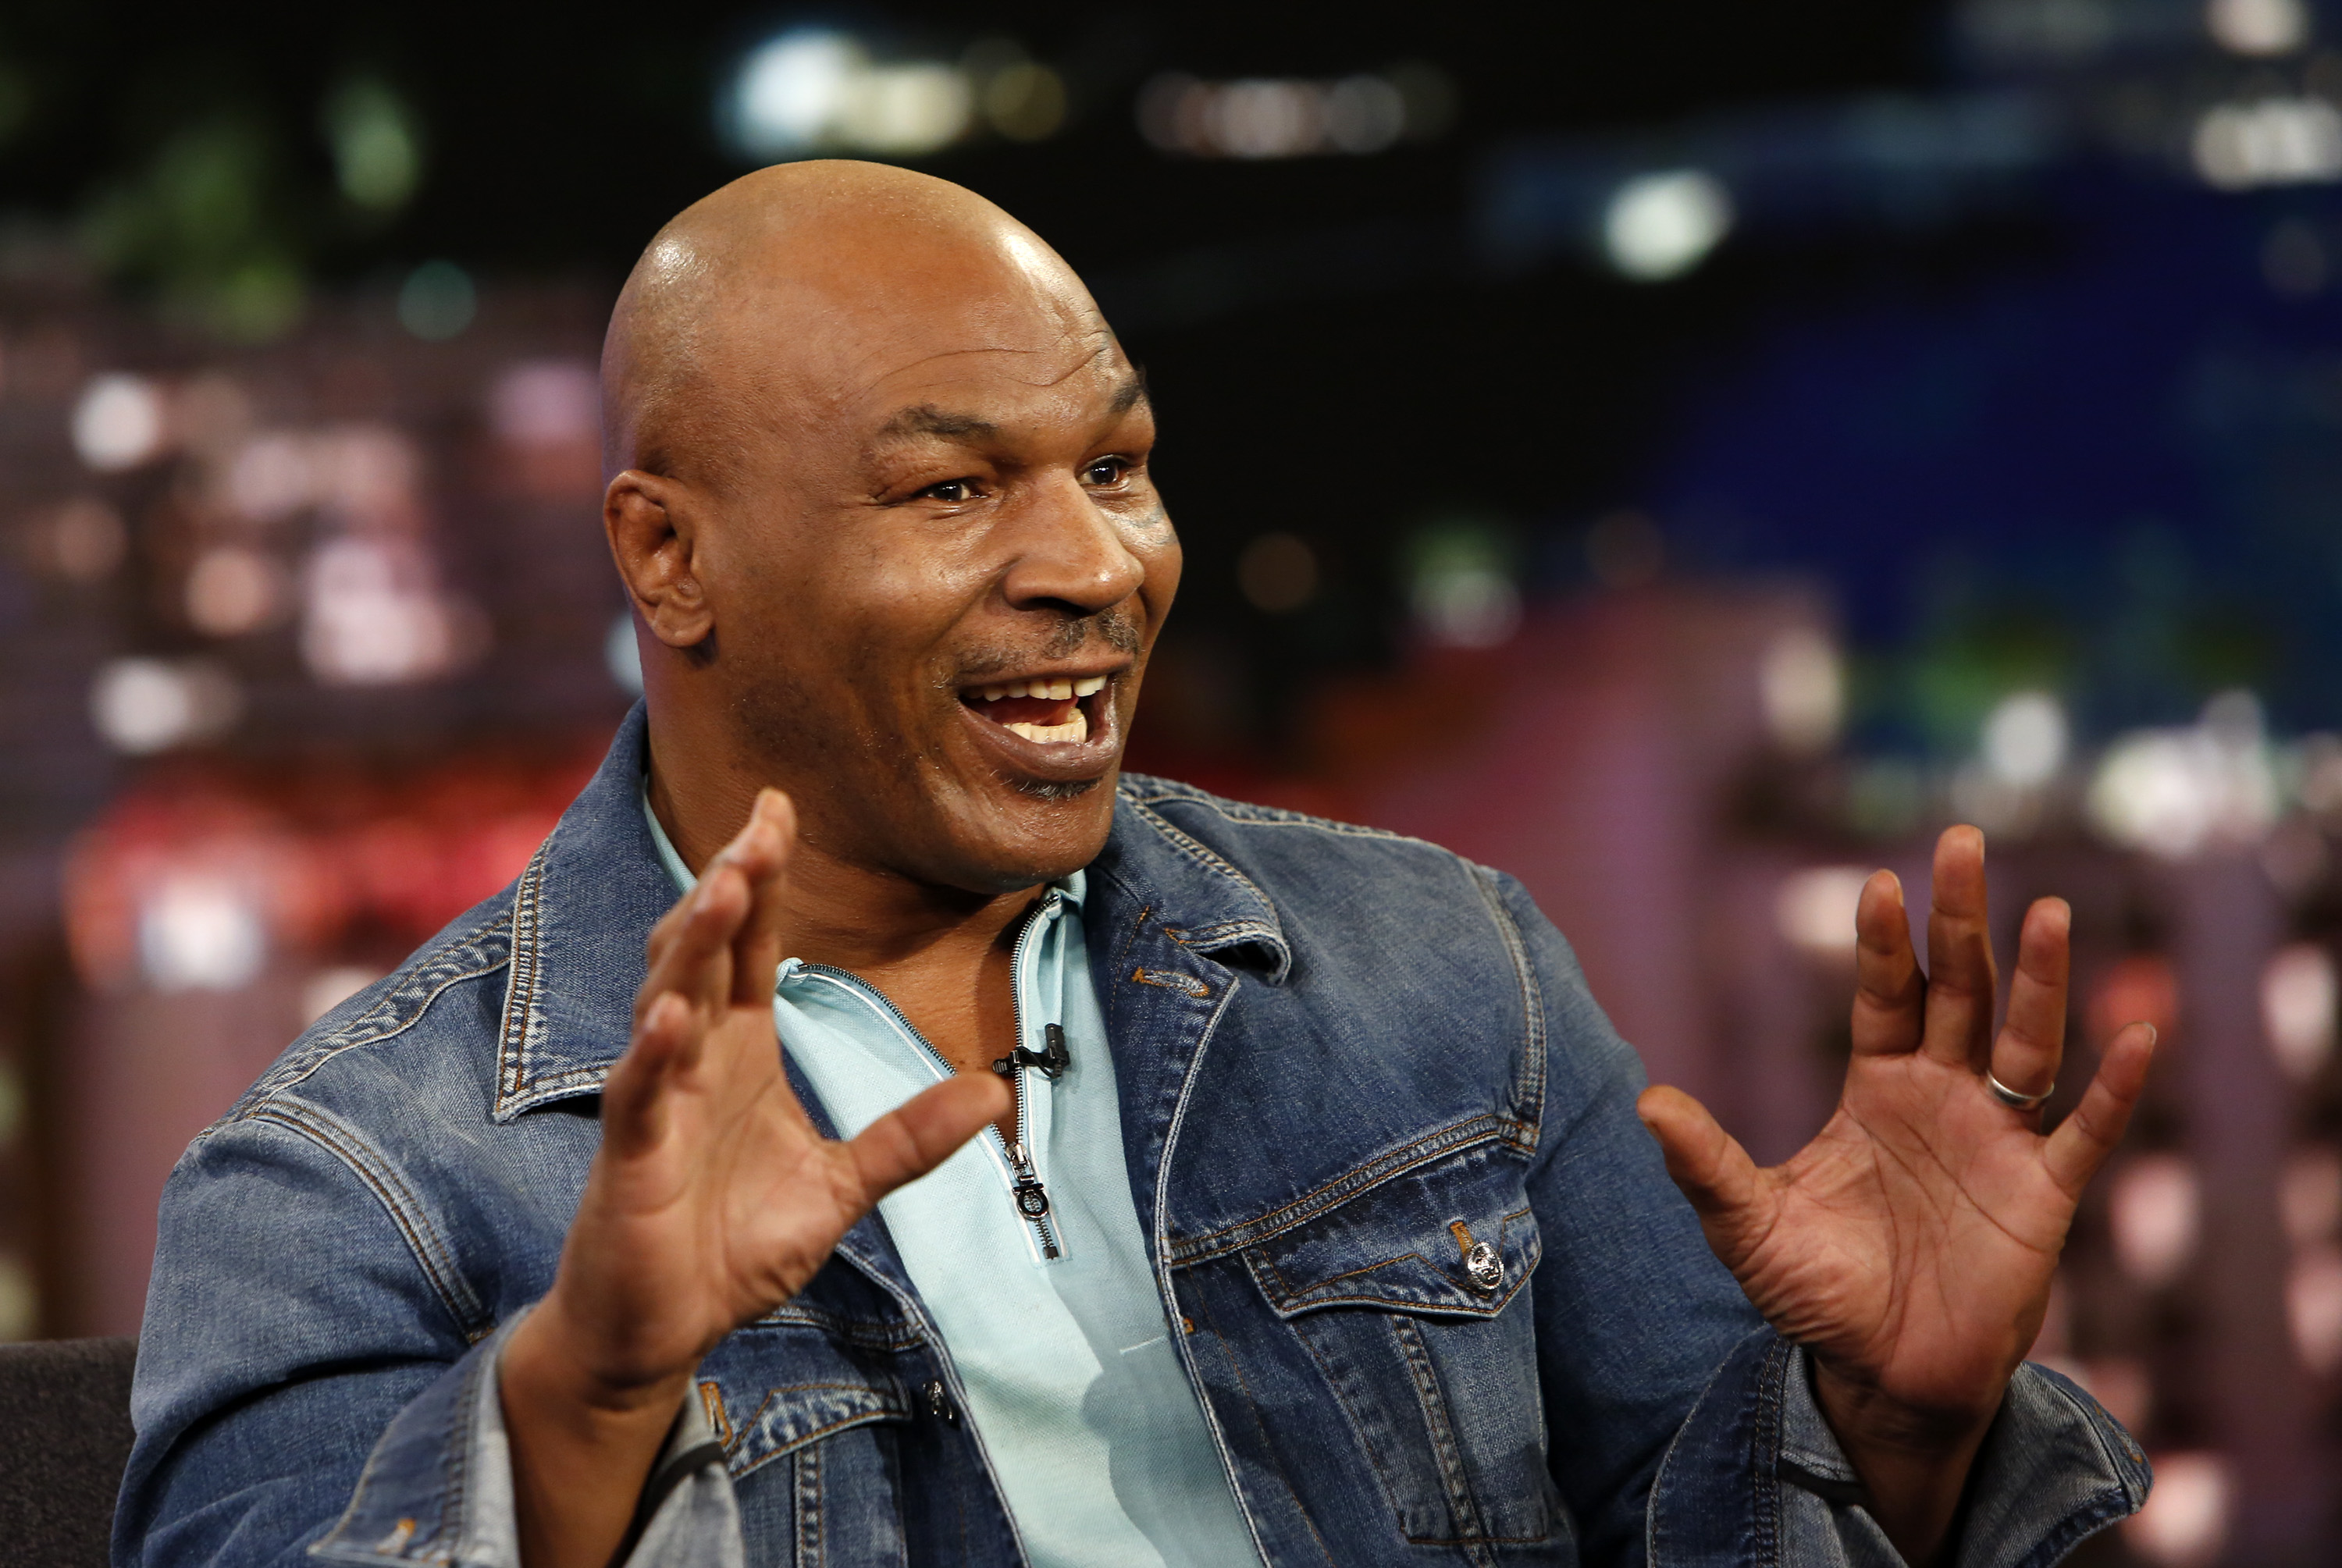 Where Does Mike Tyson Live?